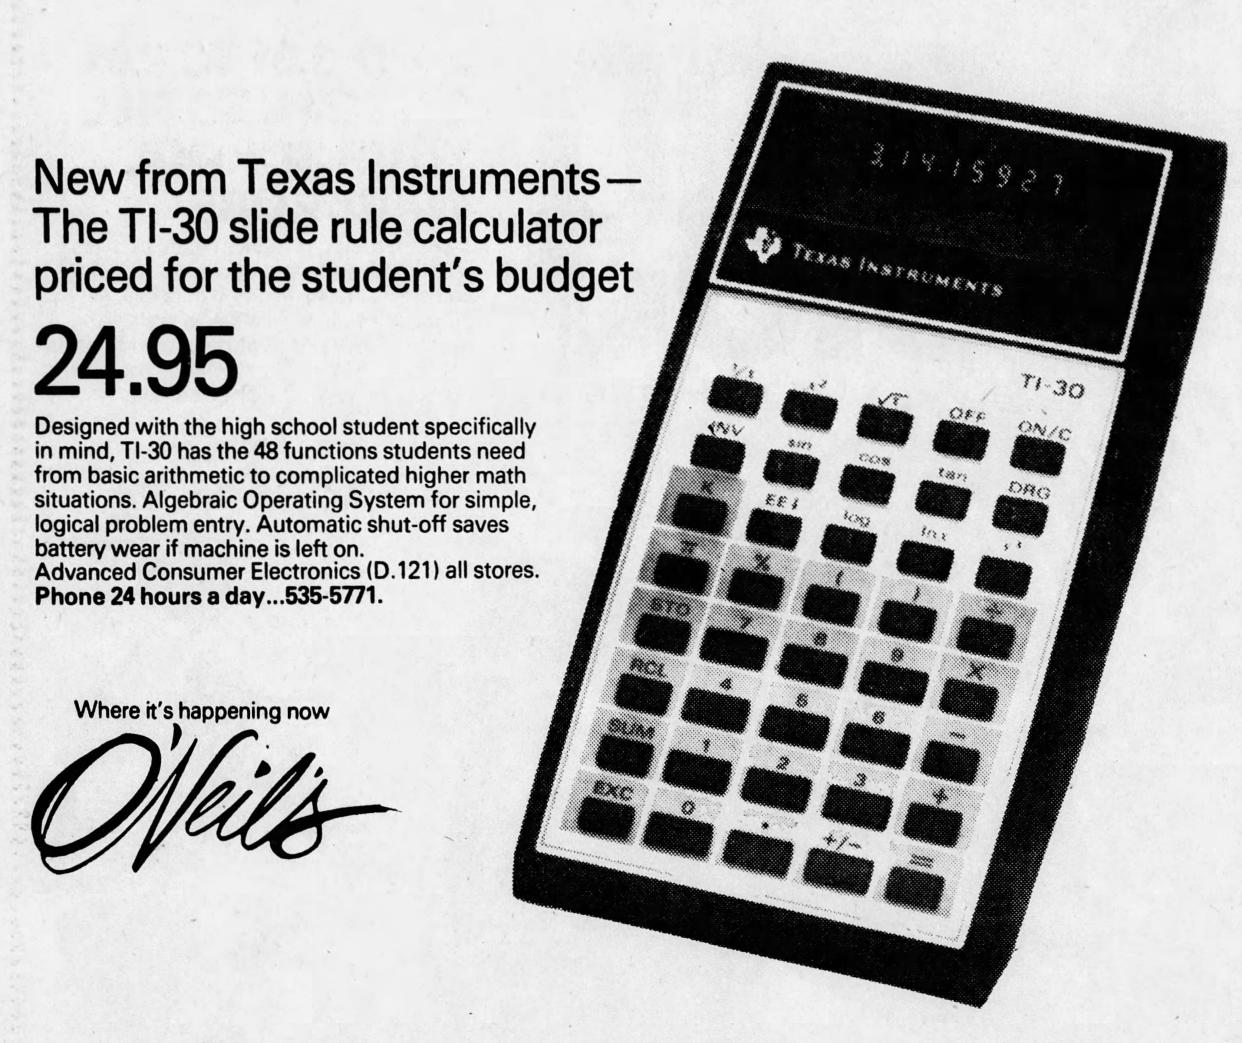 The Texas Instruments TI-30 calculator retailed for $24.95 in 1976 at O’Neil's department store in Akron.